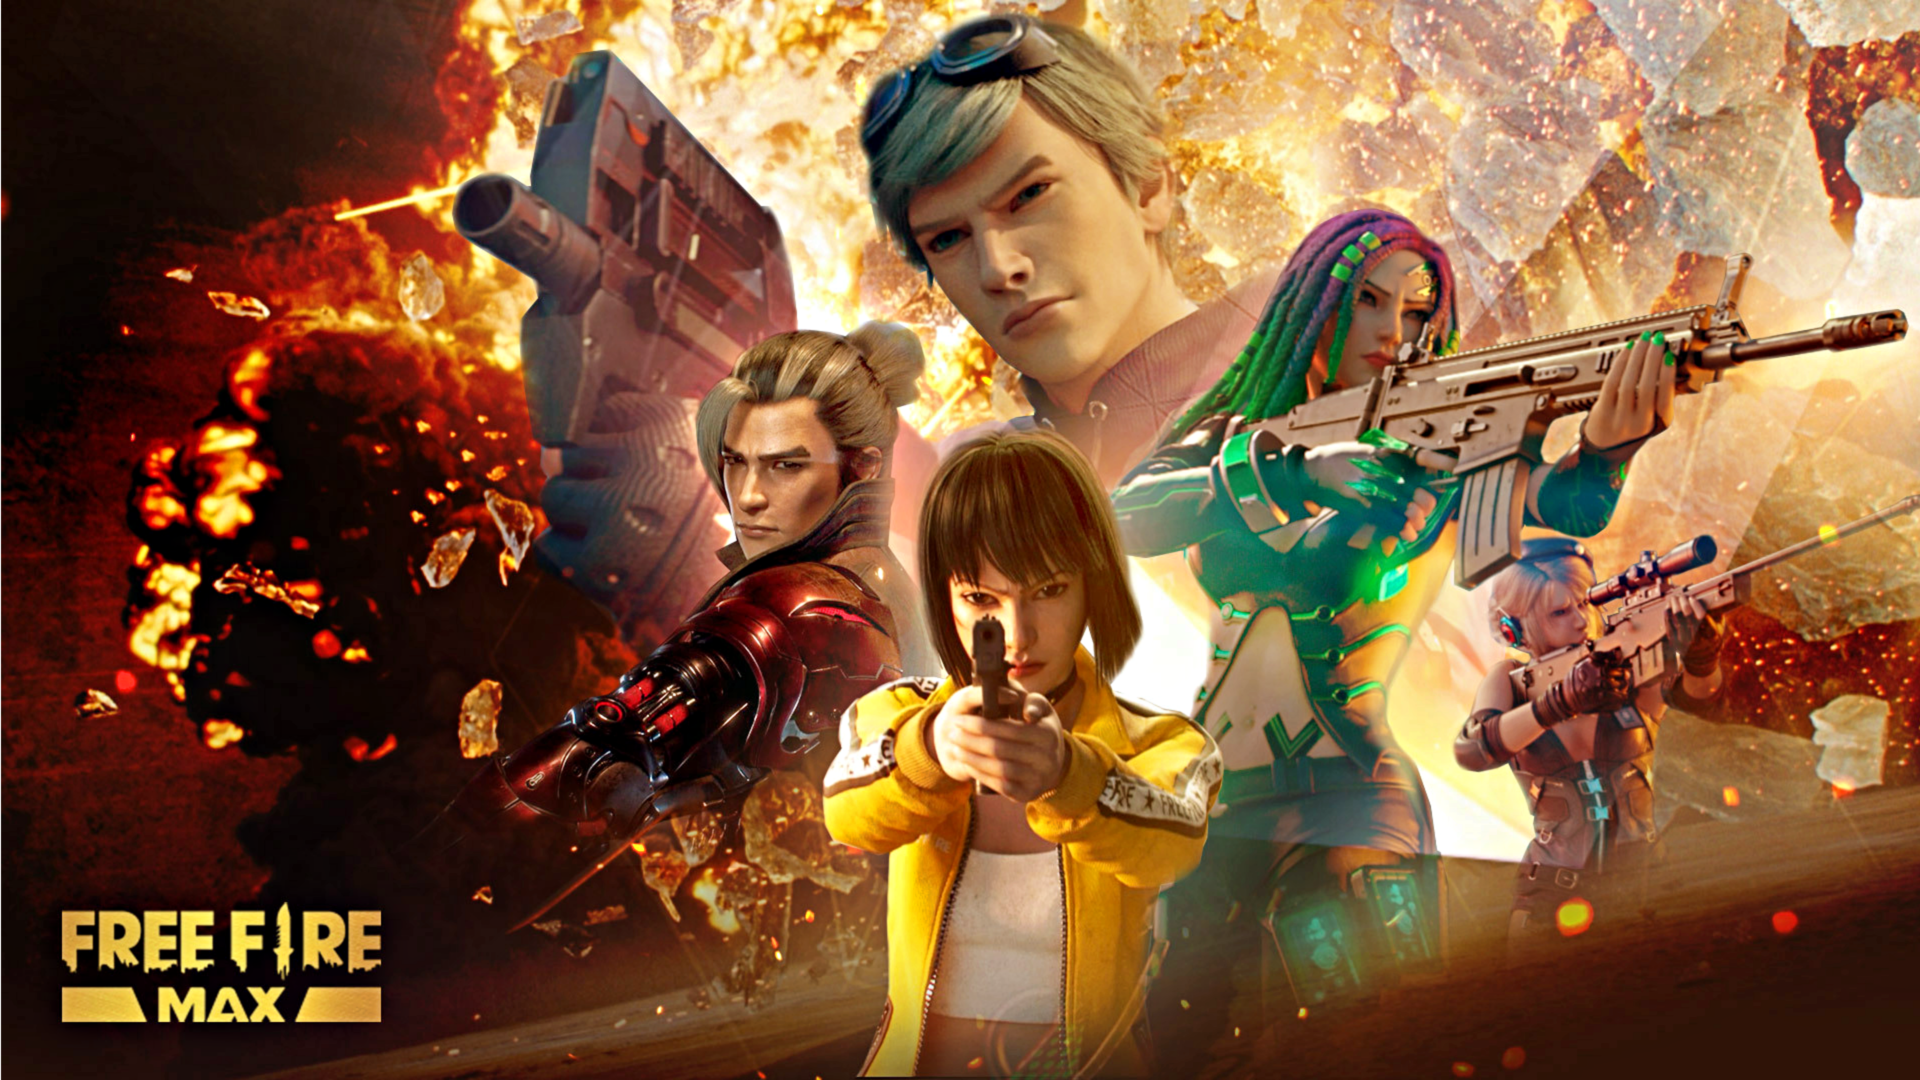 Free Fire MAX codes for March 24: How to redeem